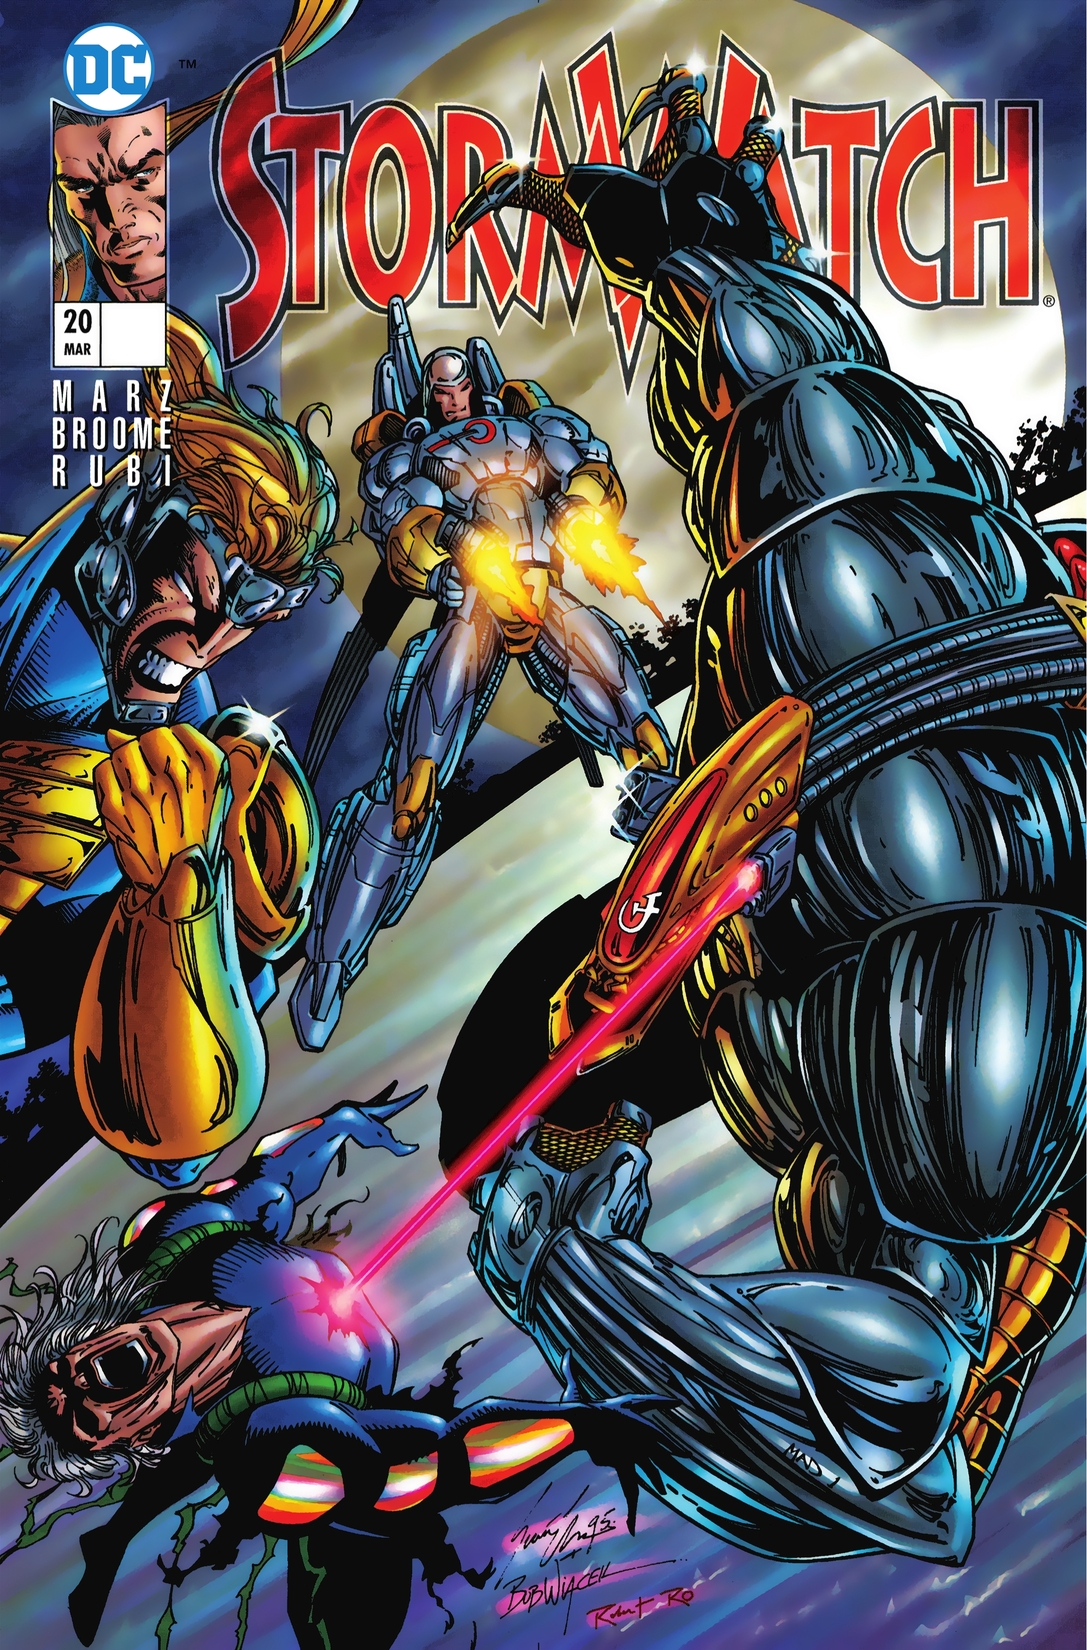 Stormwatch (1993-1997) #20 preview images